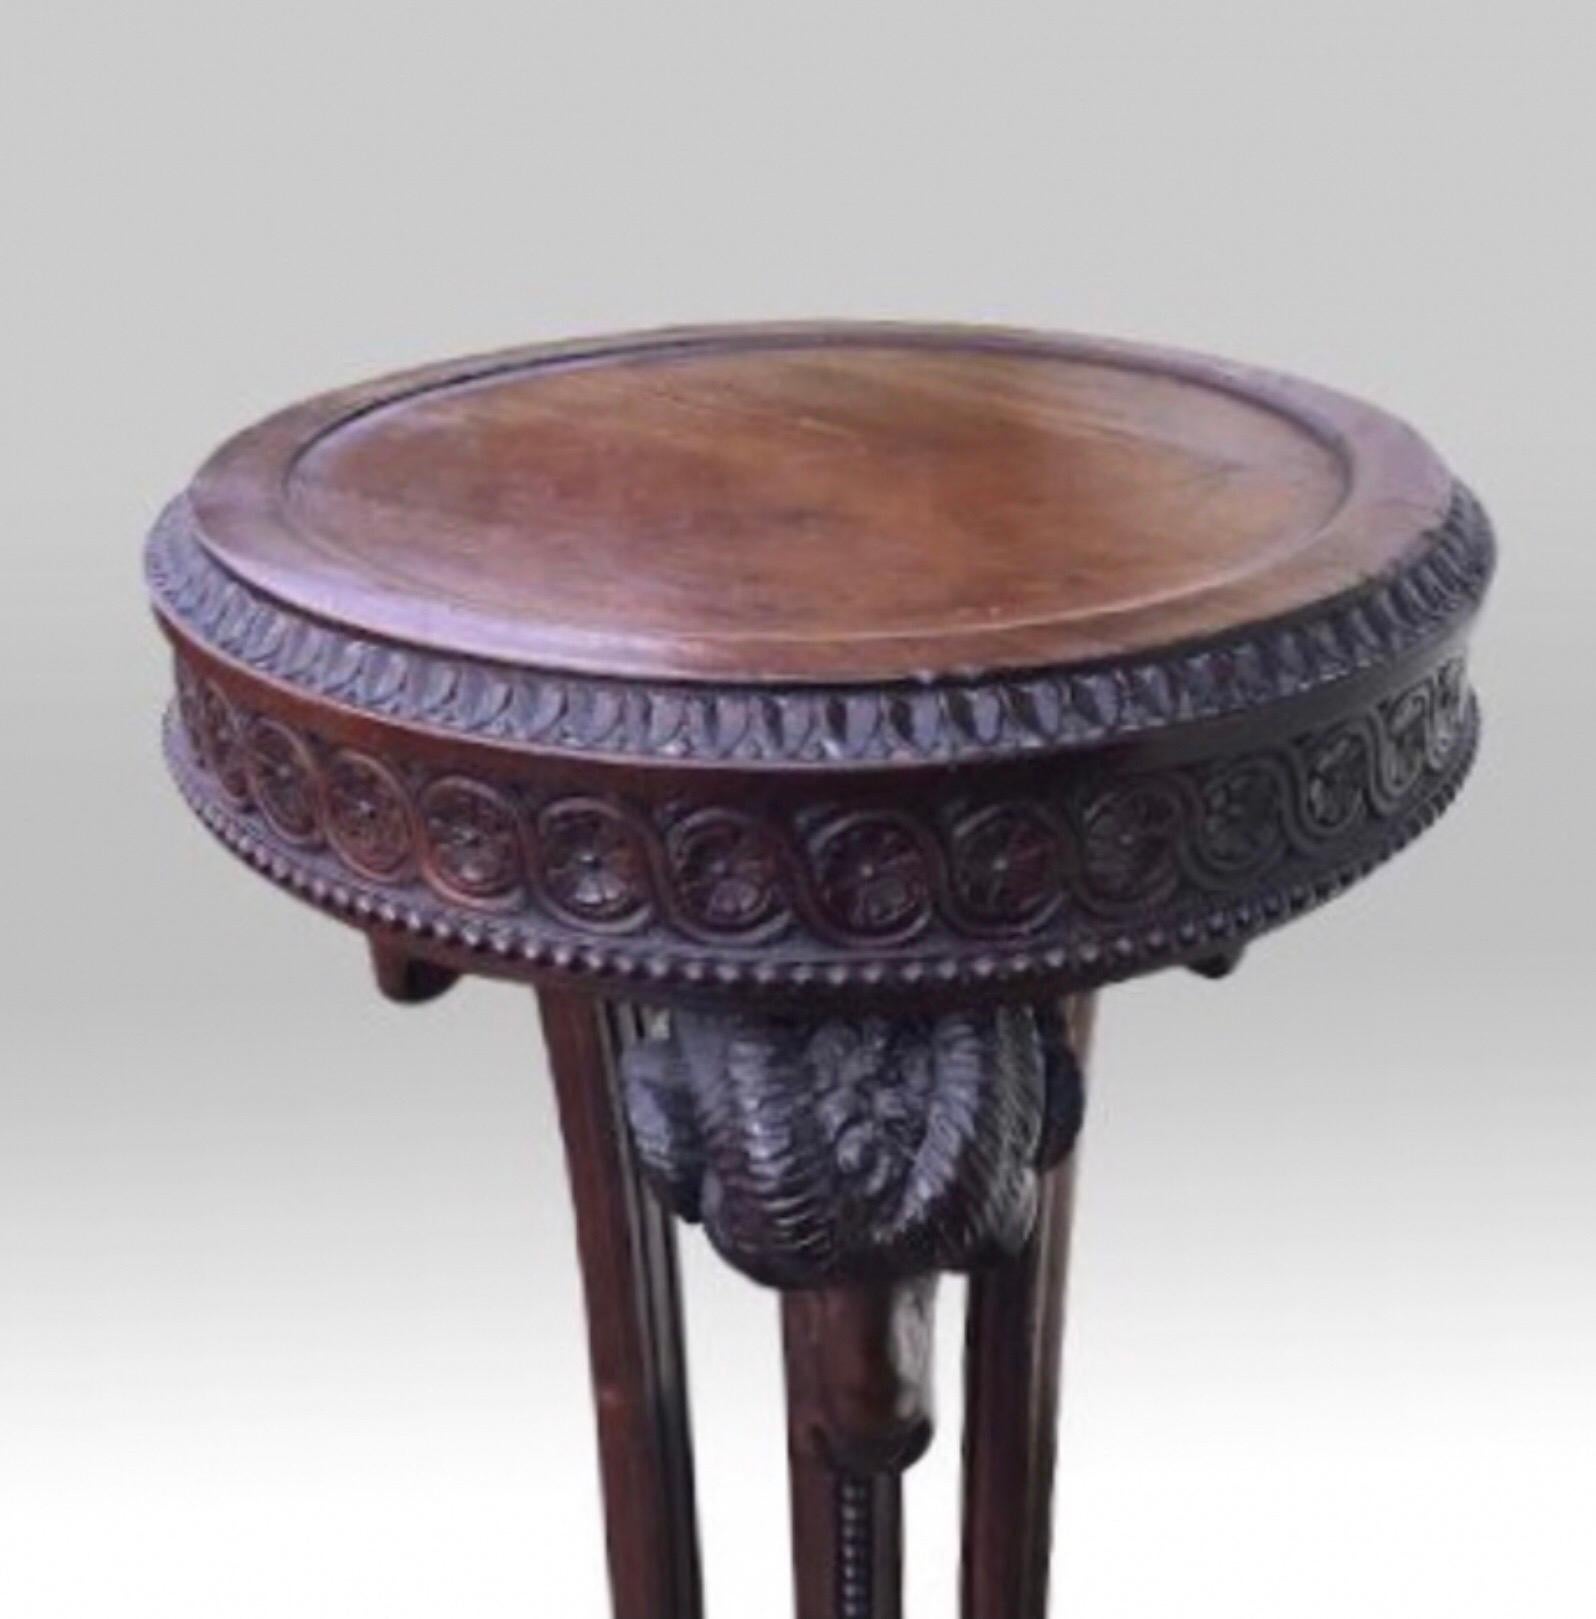 Superb Quality antique Mahogany Regency design Torchere, plant stand,
Exquisitely carved with rams heads and rams feet 
Circa 1900.
   